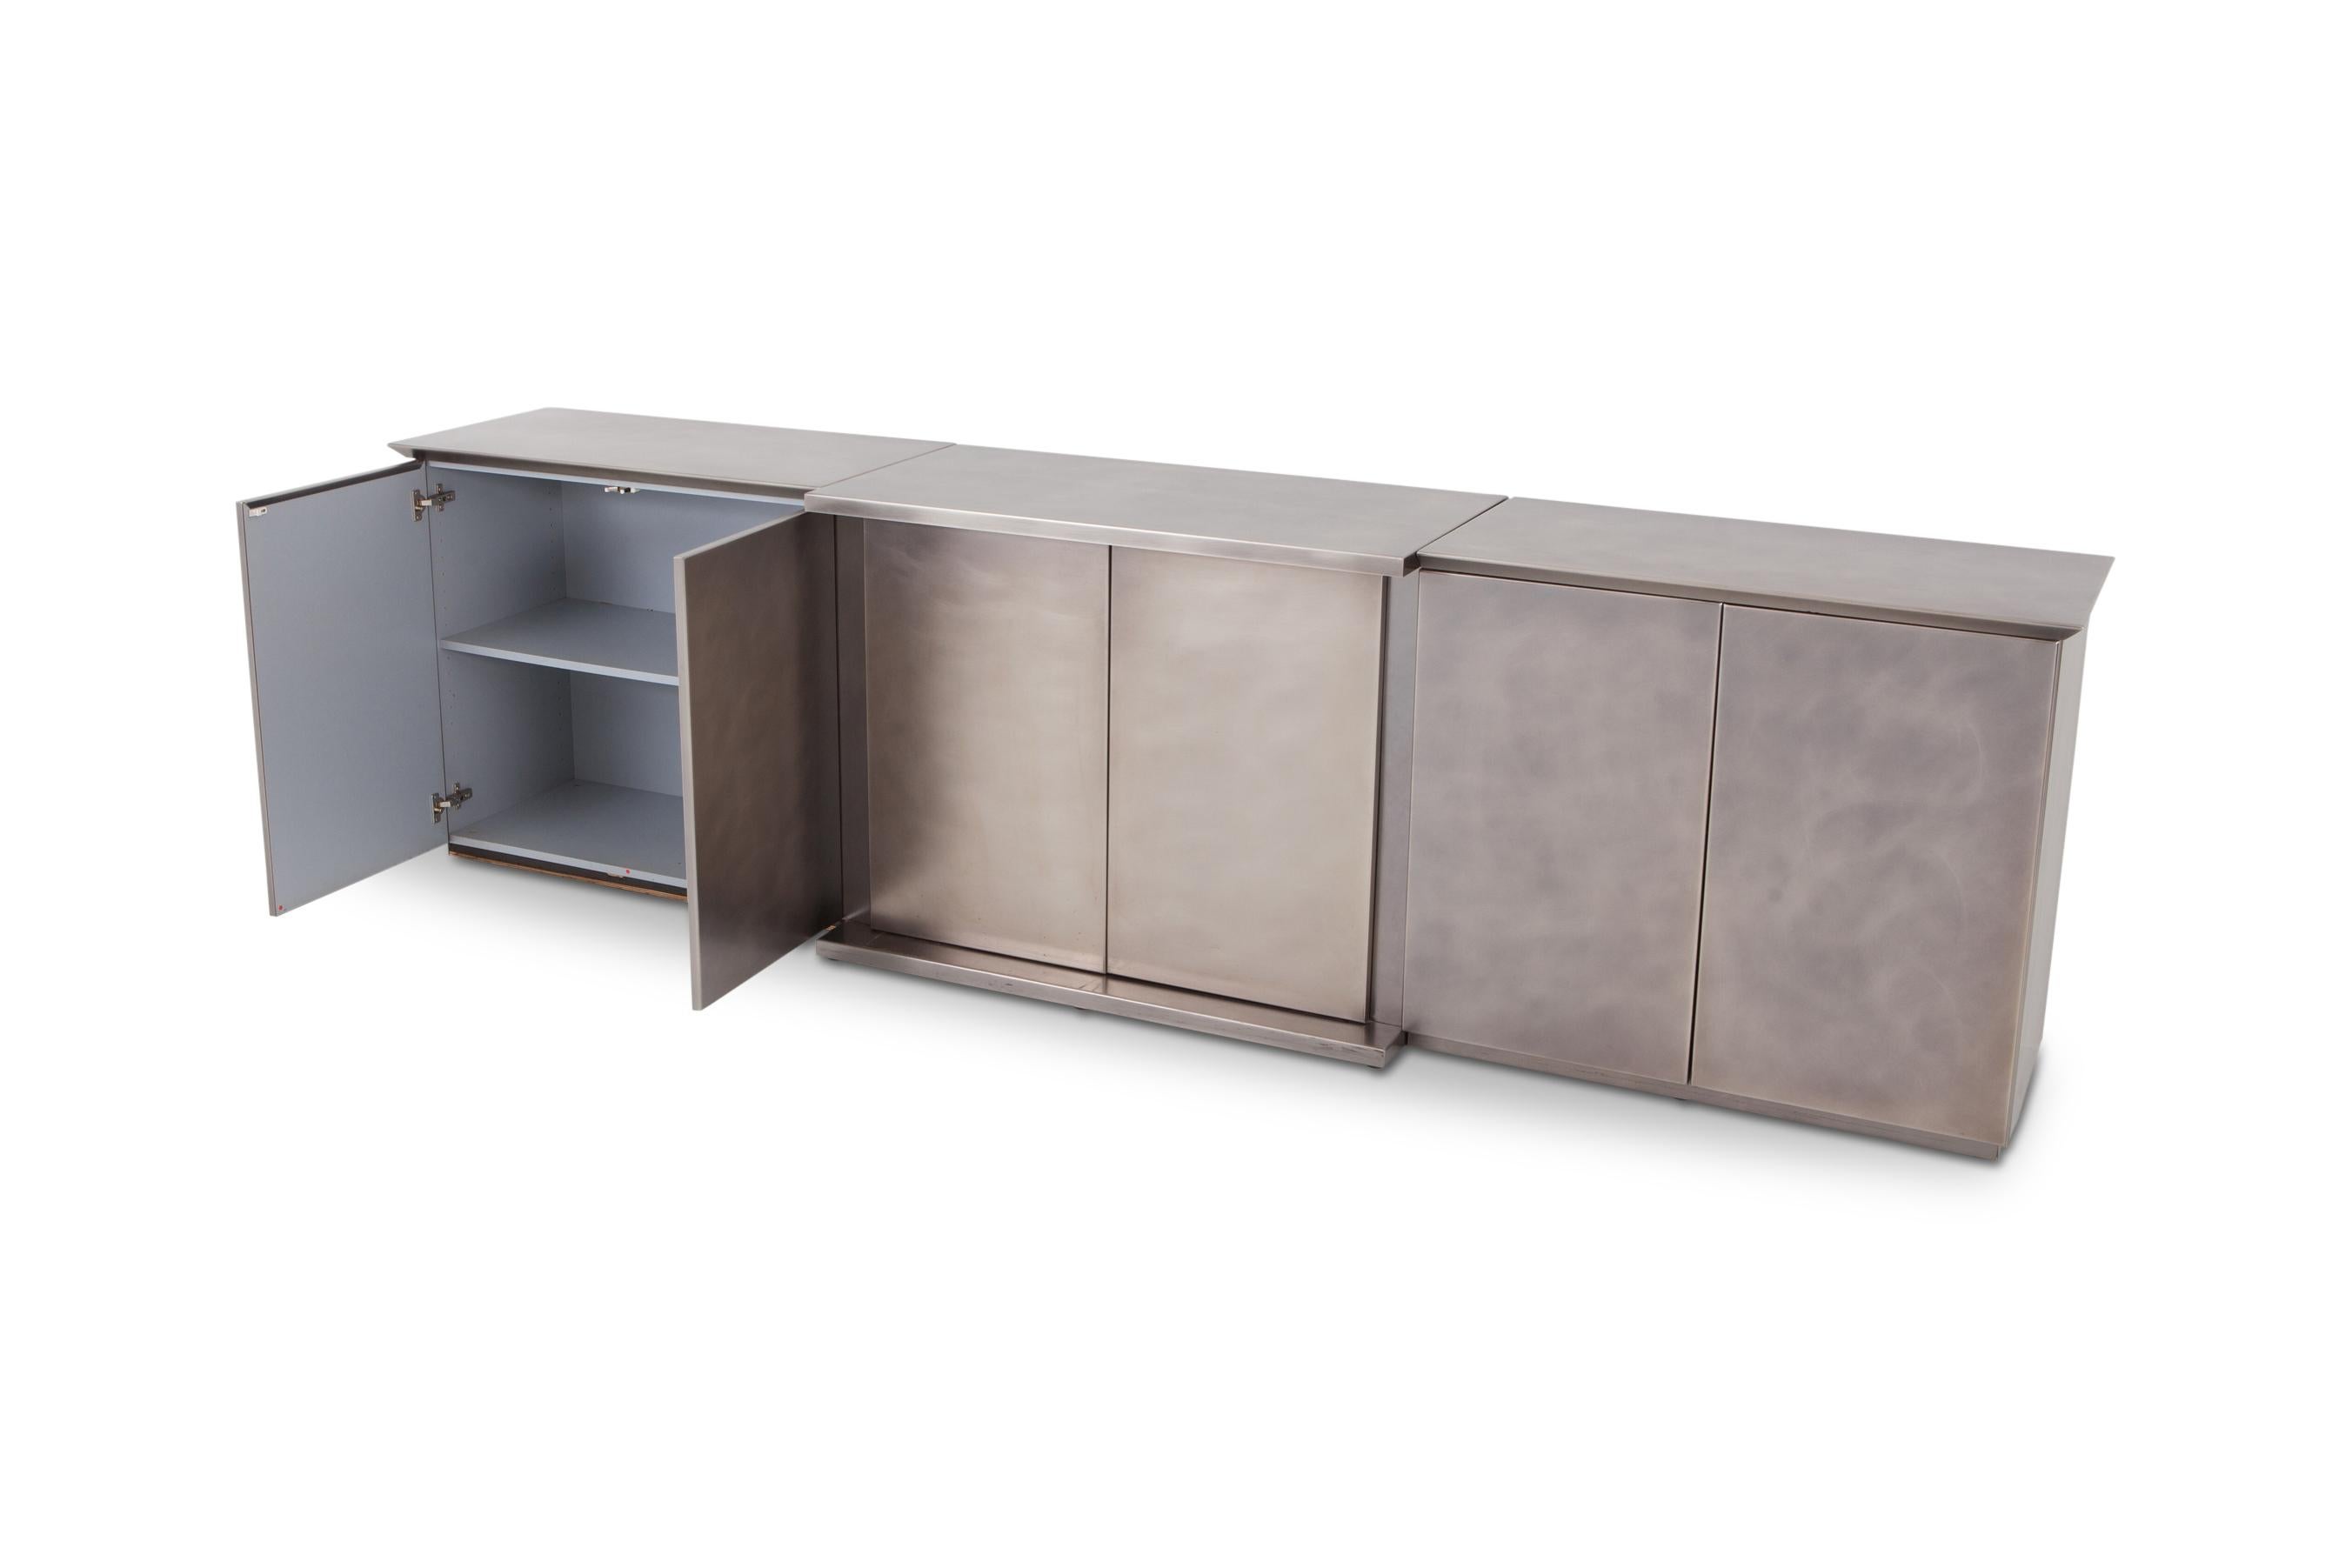 Late 20th Century Maison Jansen style Credenza in Brushed Stainless Steel, 1980s